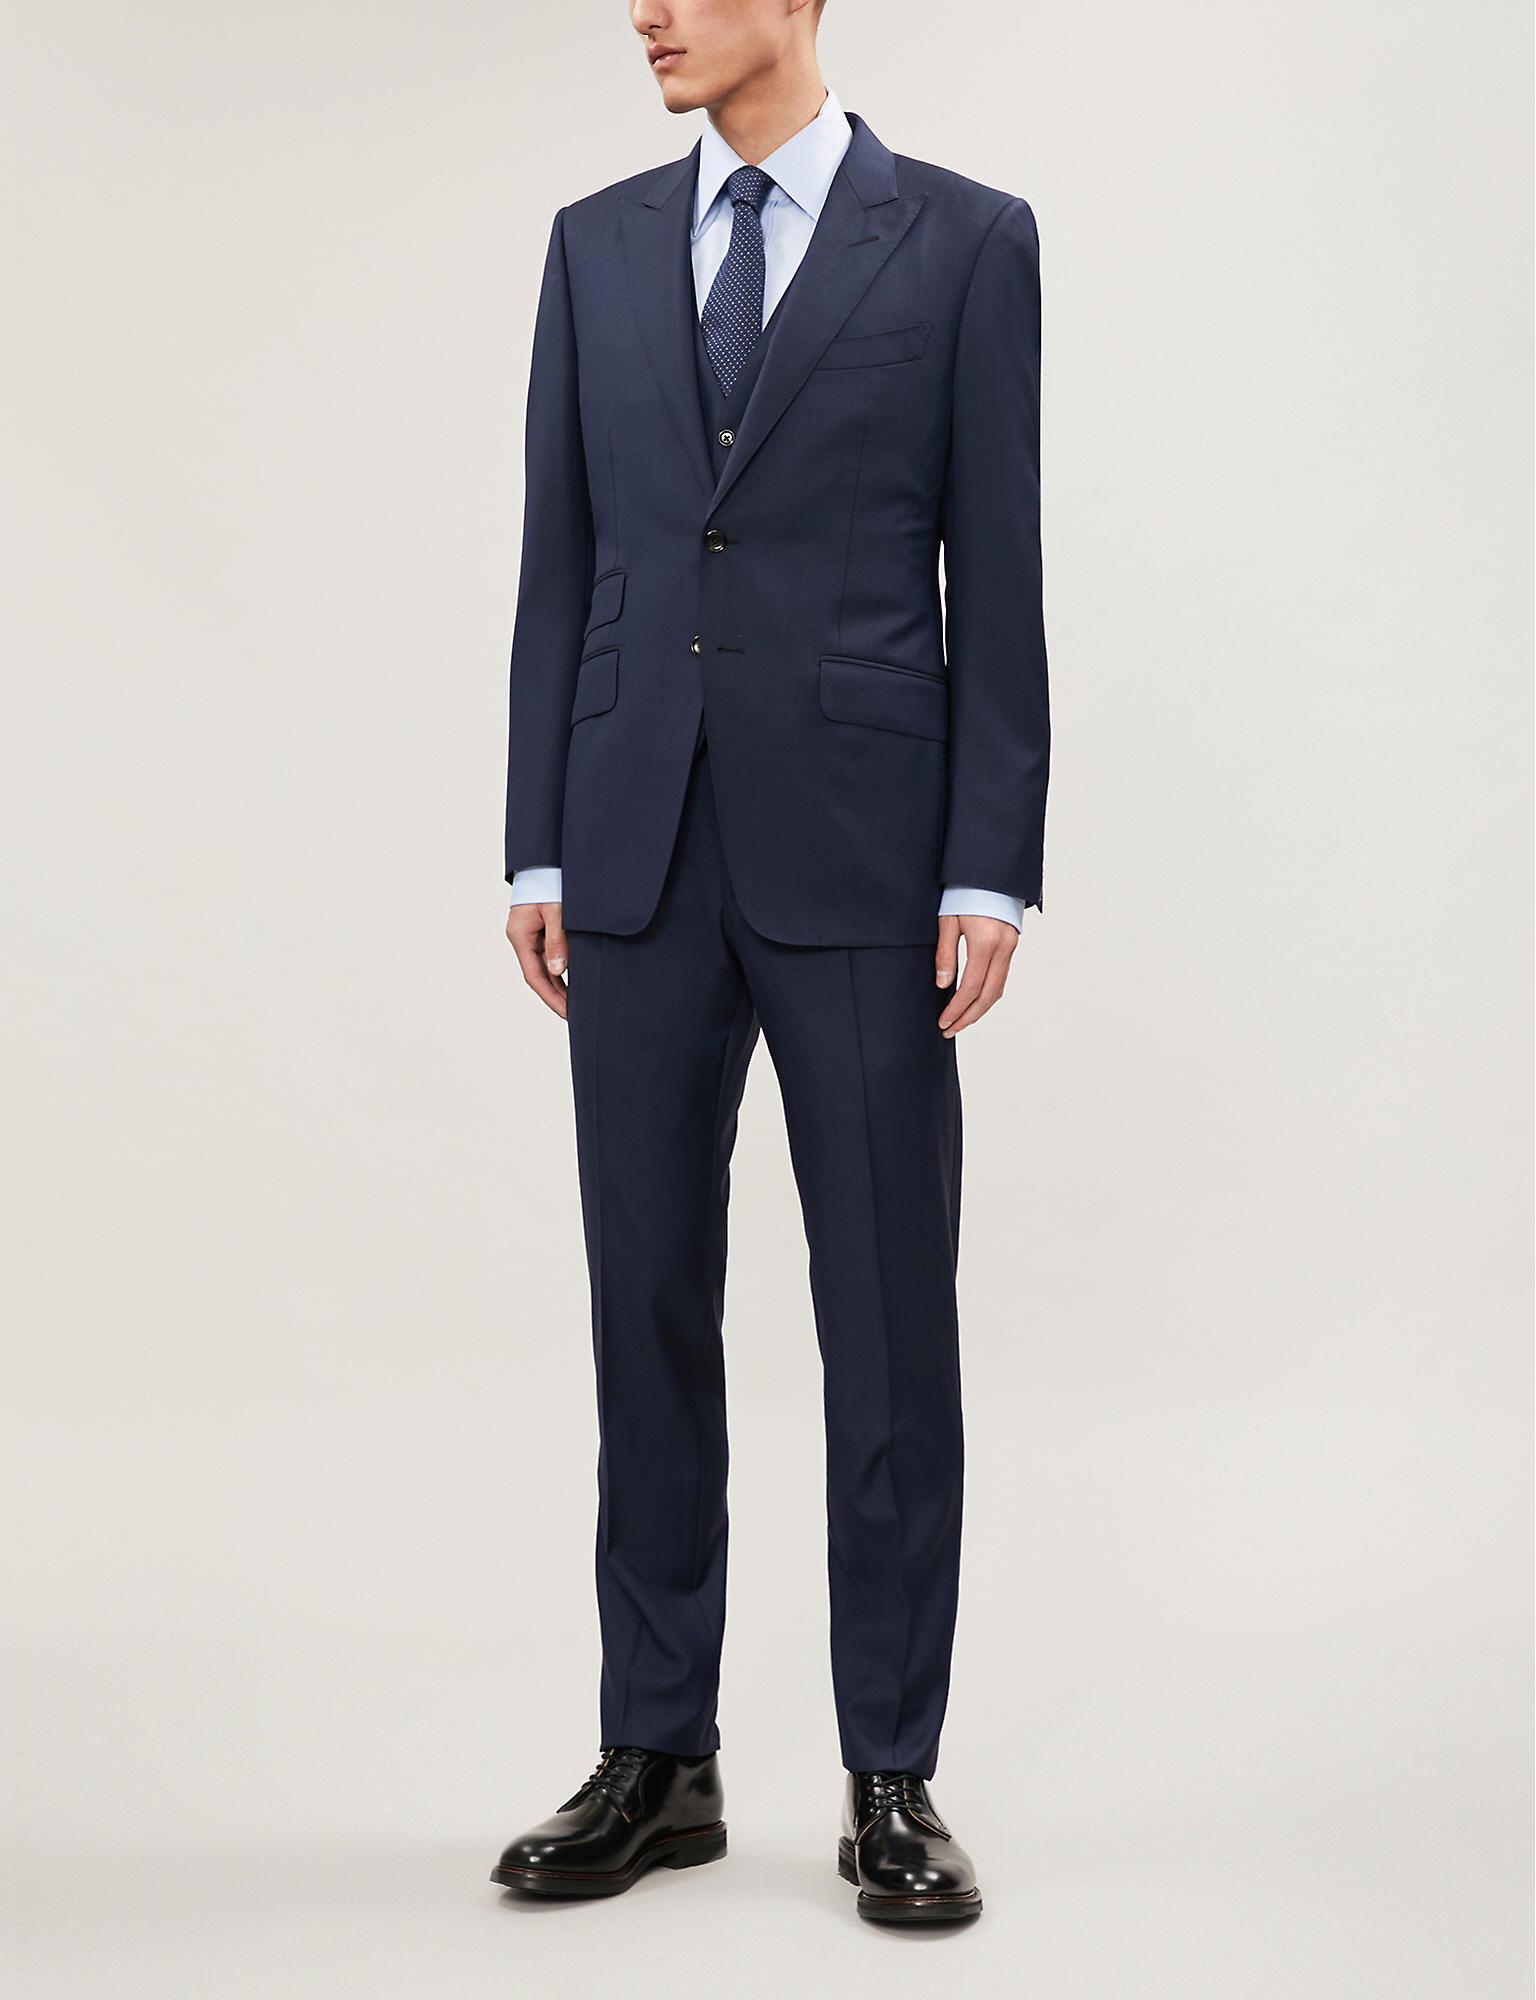 Tom Ford Windsor-fit Wool Three Piece Suit in Navy (Blue) for Men - Lyst